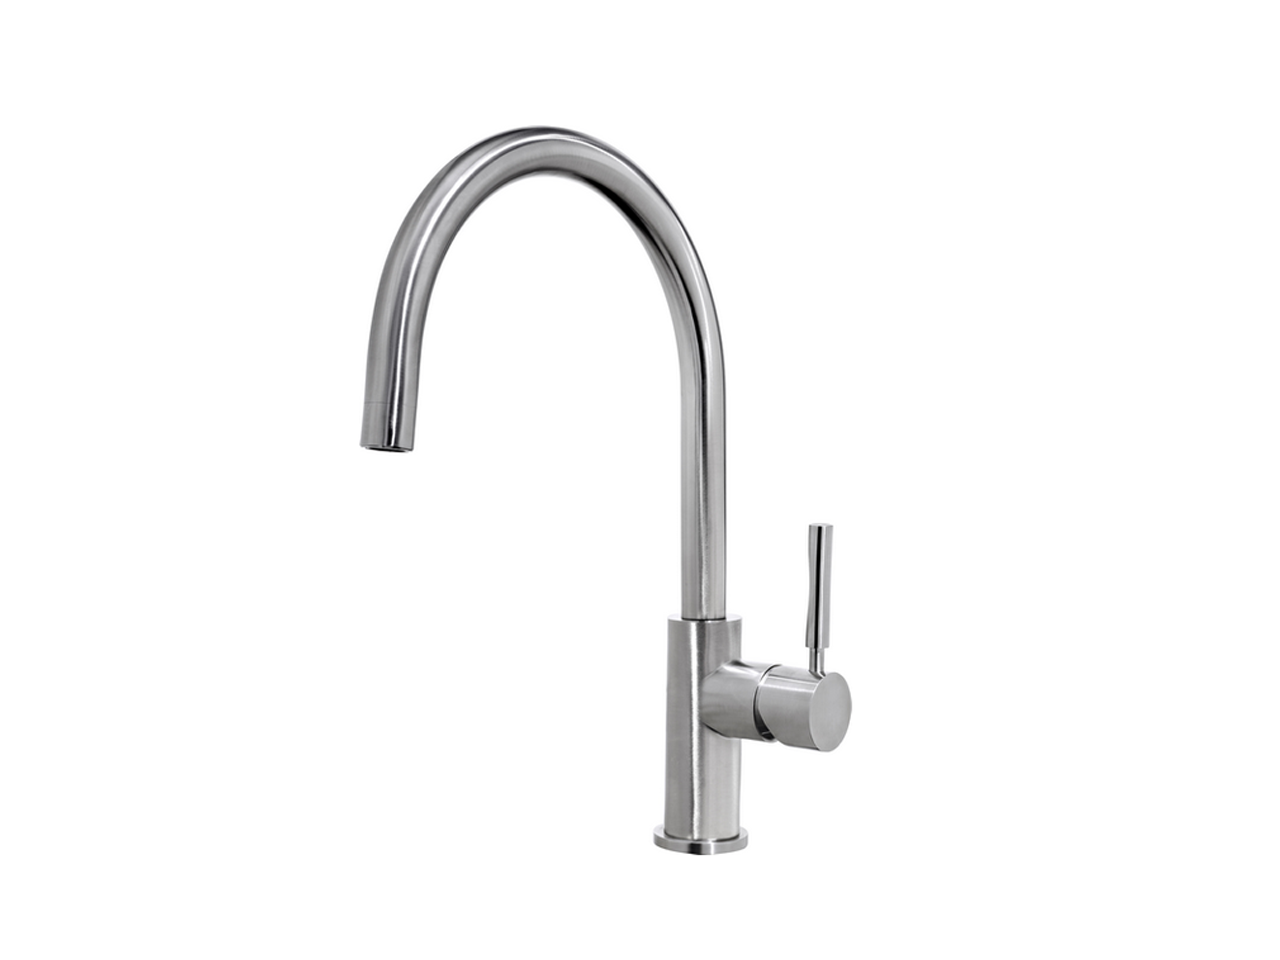 CisalSingle lever sink mixer, STAINLESS STEEL made KITCHEN_LC000060